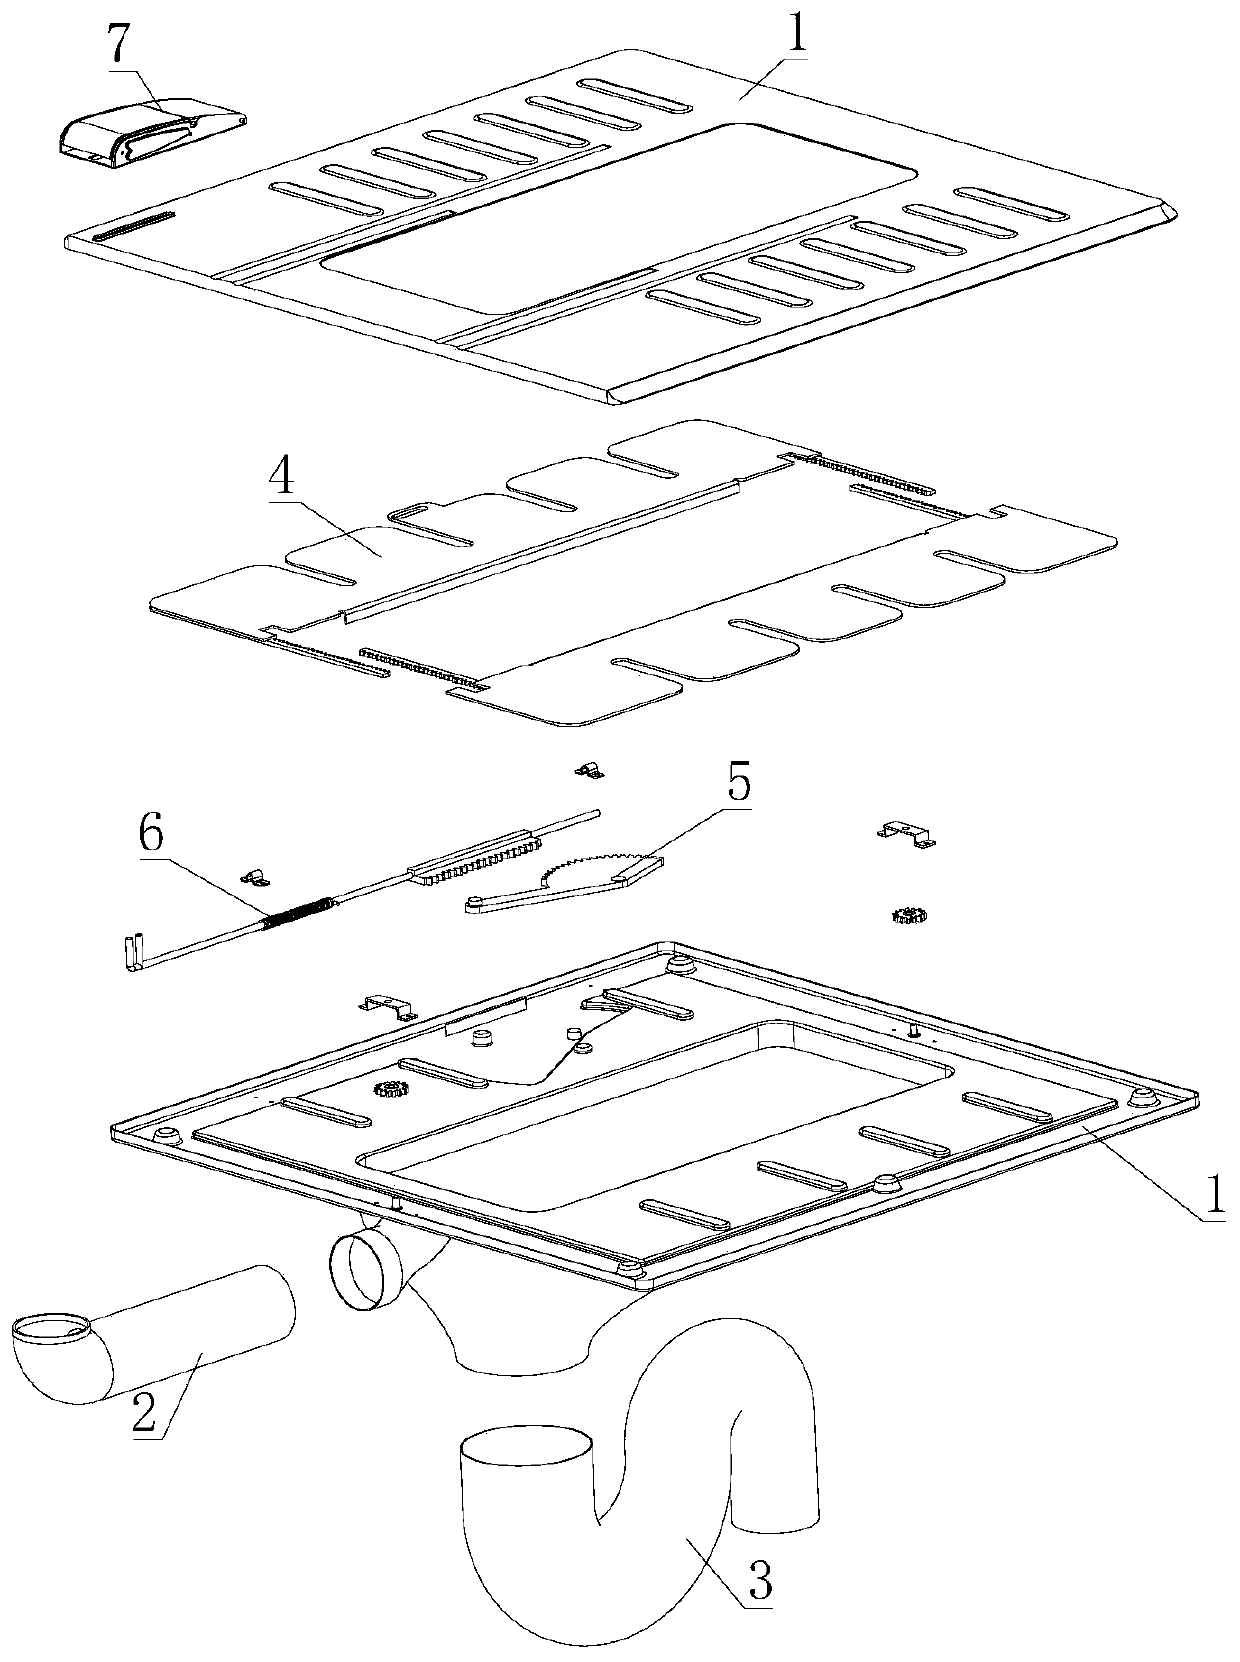 Squatting pan capable of being covered and squatting pan device